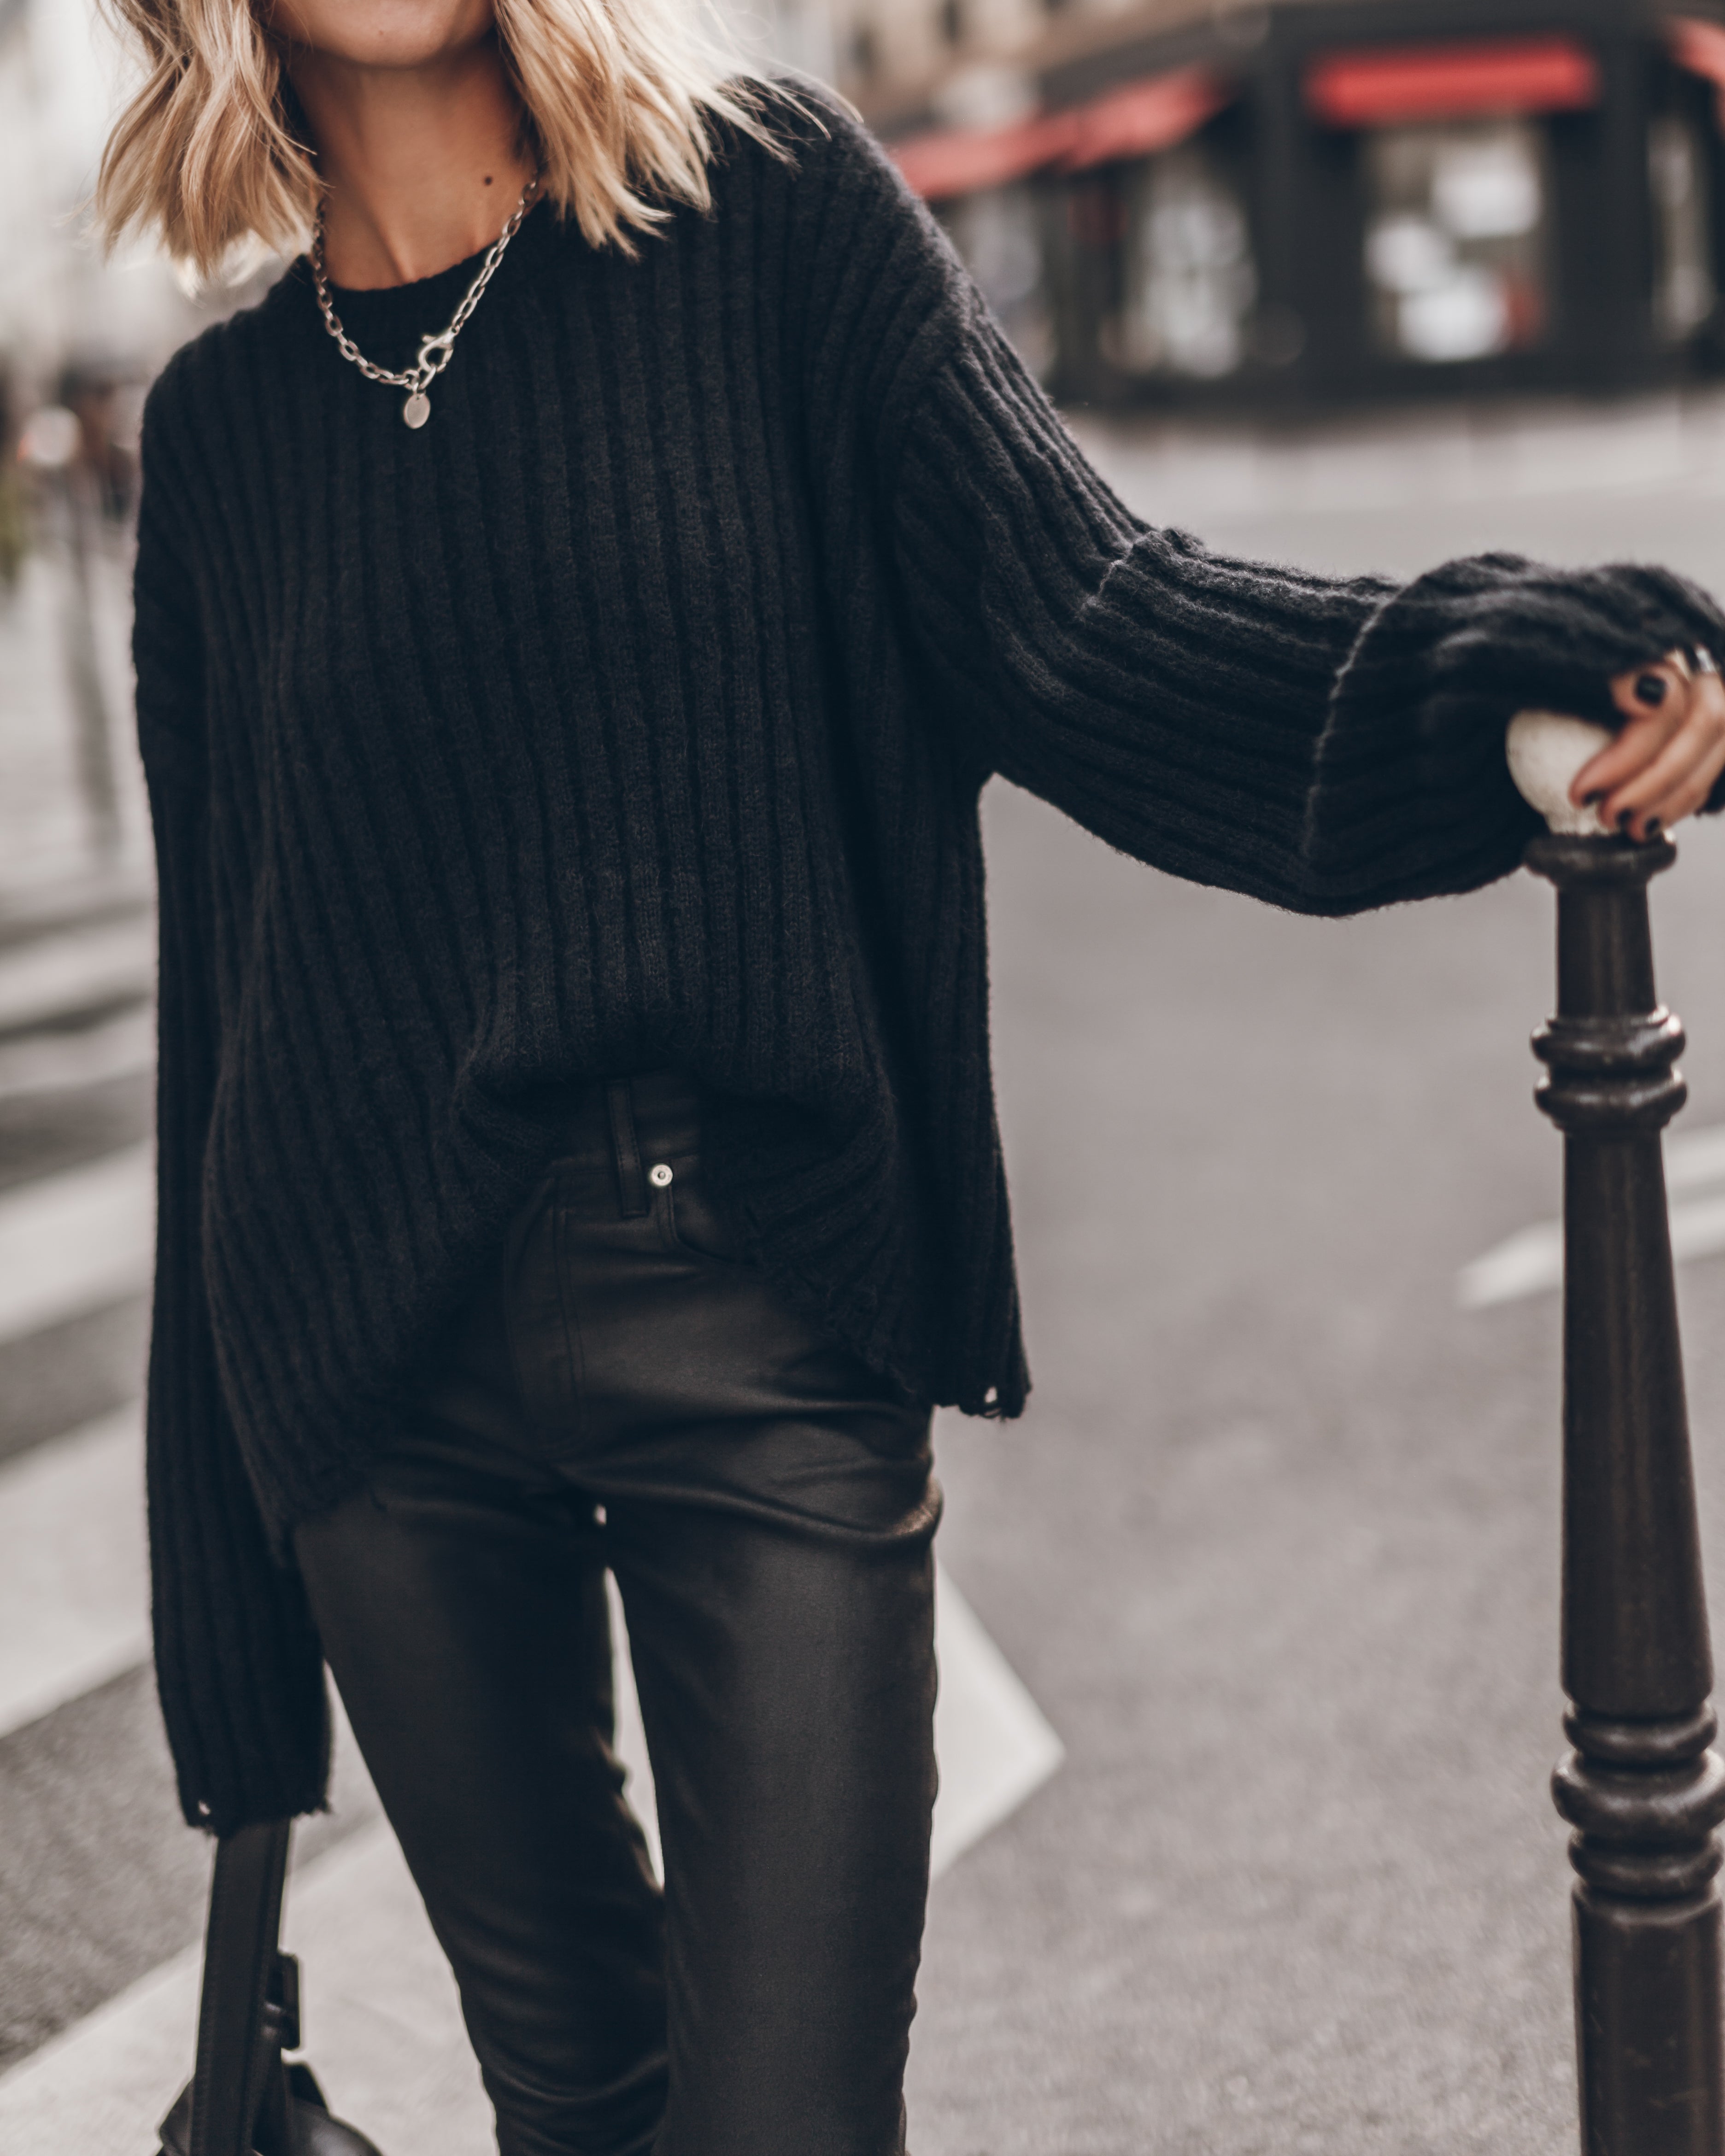 The Black Destroyed Knitted Sweater